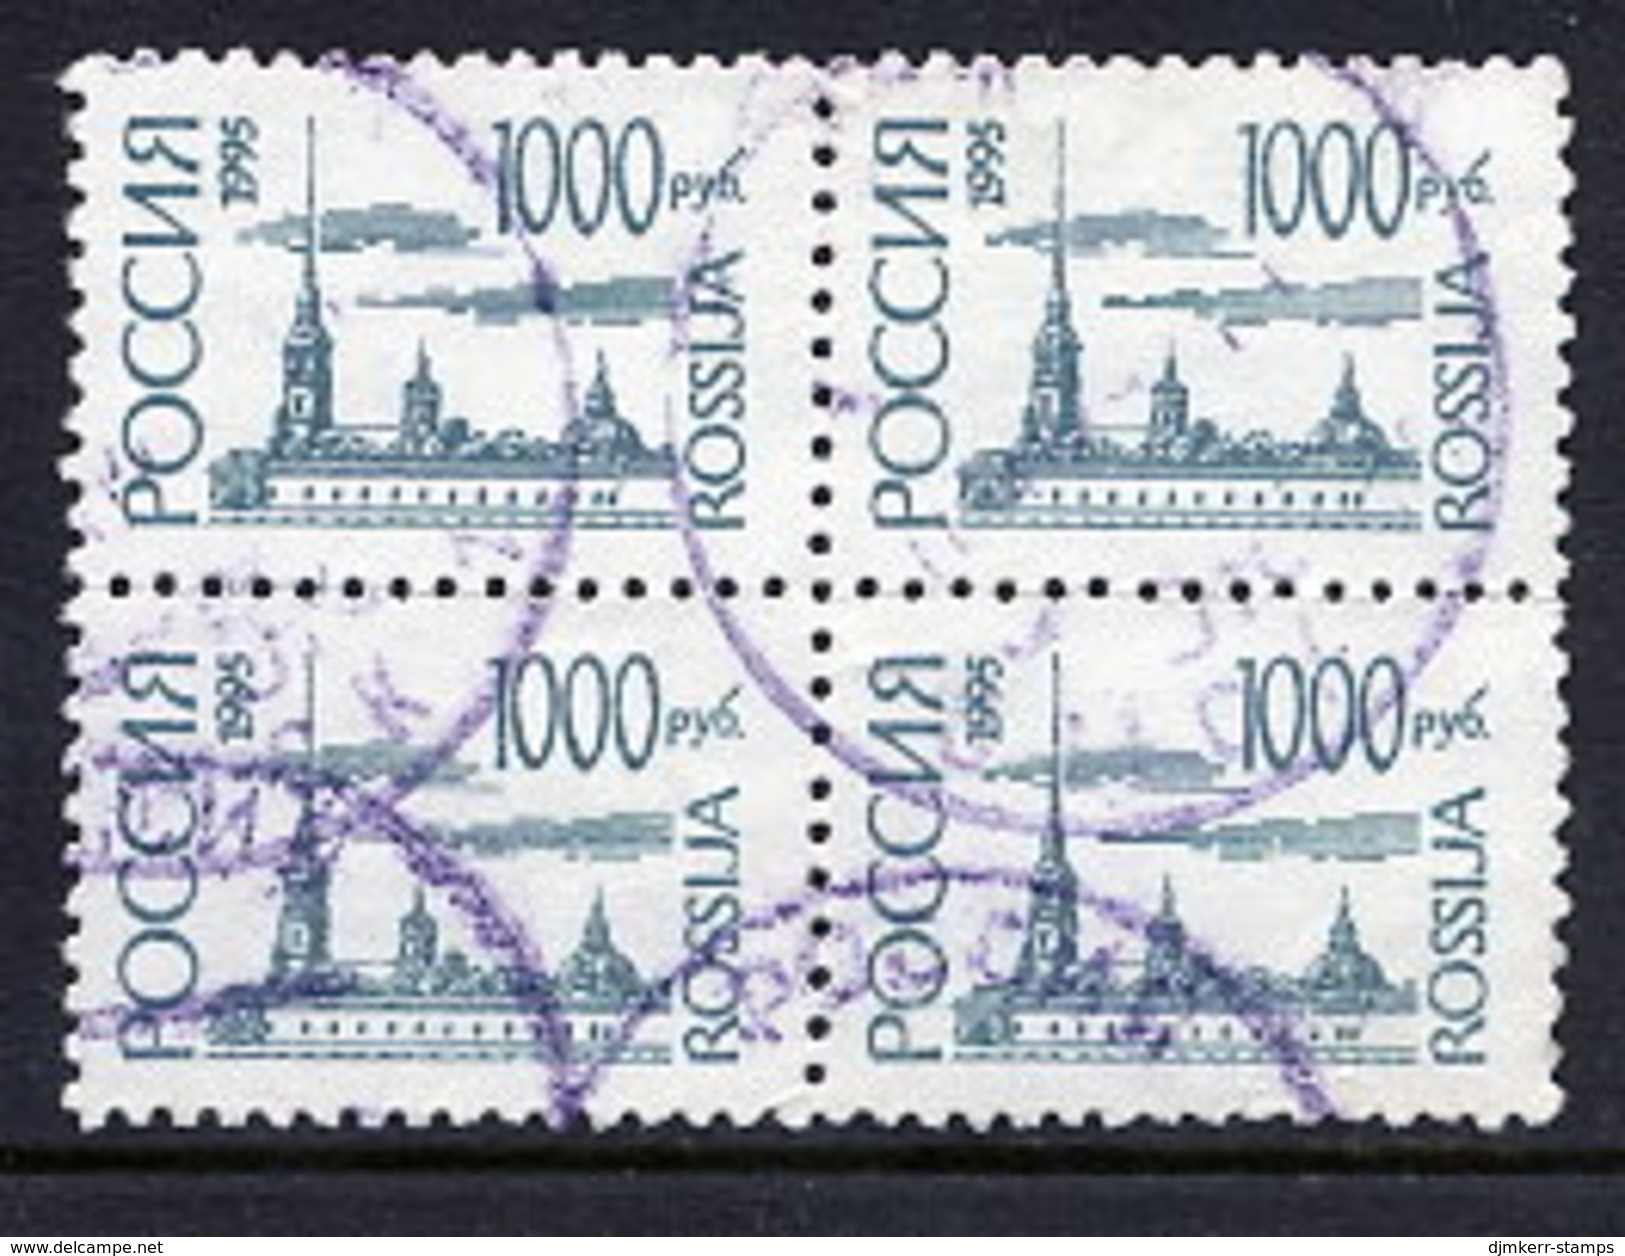 RUSSIAN FEDERATION 1995 Buildings Definitive 1000 R.  On Ordinary  Paper Block Of 4 Used.  Michel 414w - Gebraucht